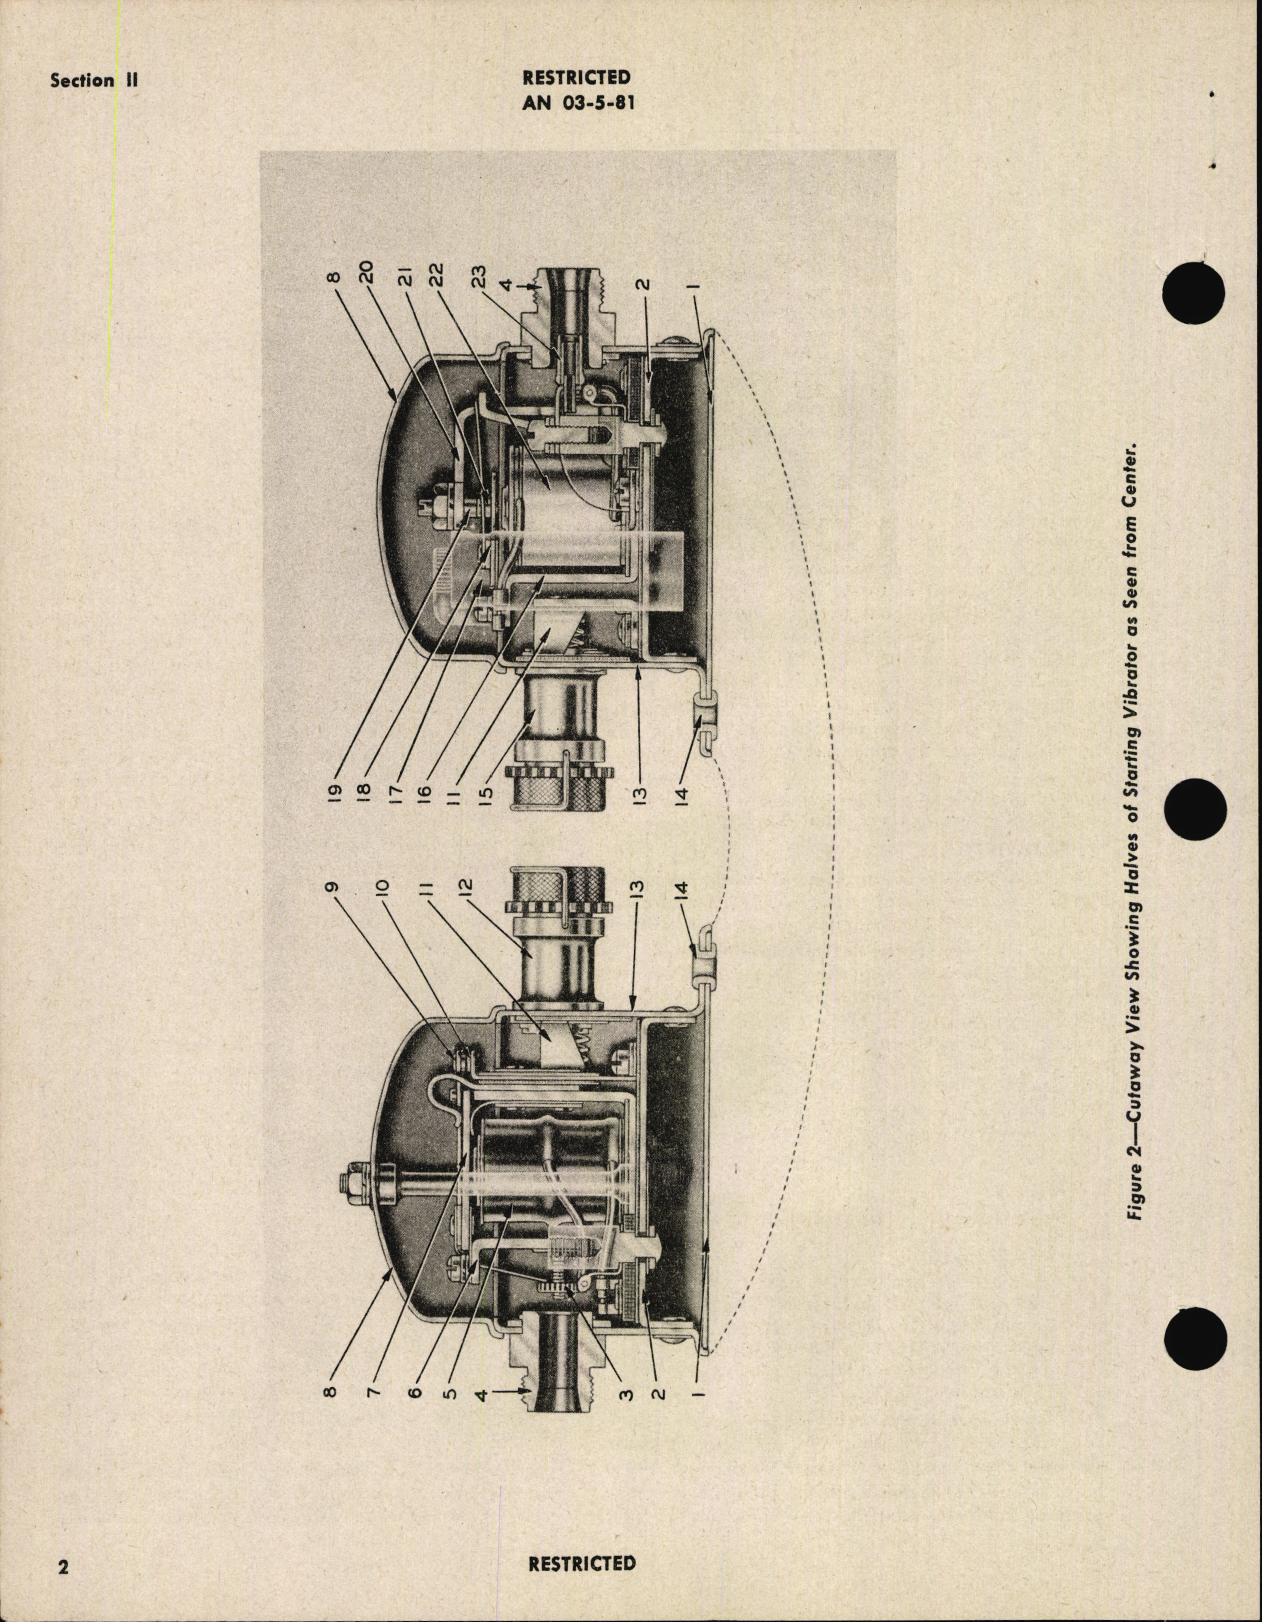 Sample page 6 from AirCorps Library document: Handbook of Instructions with Parts Catalog for Starting Vibrators VJR4C3 and VJR24C5